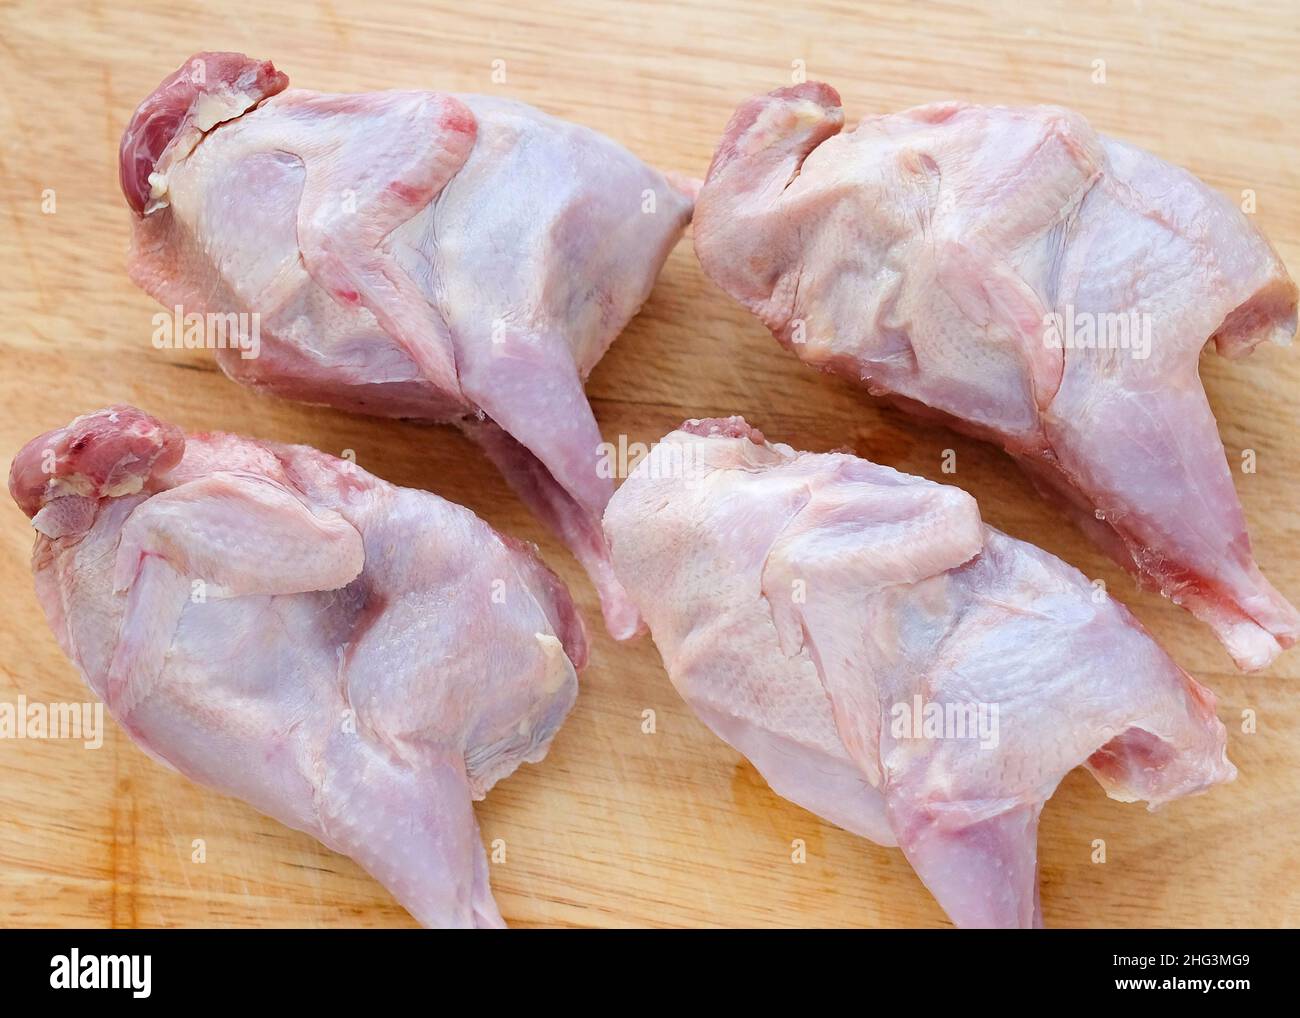 Quail carcasses lie on a cutting board. Small birds are prepared for cooking. Stock Photo